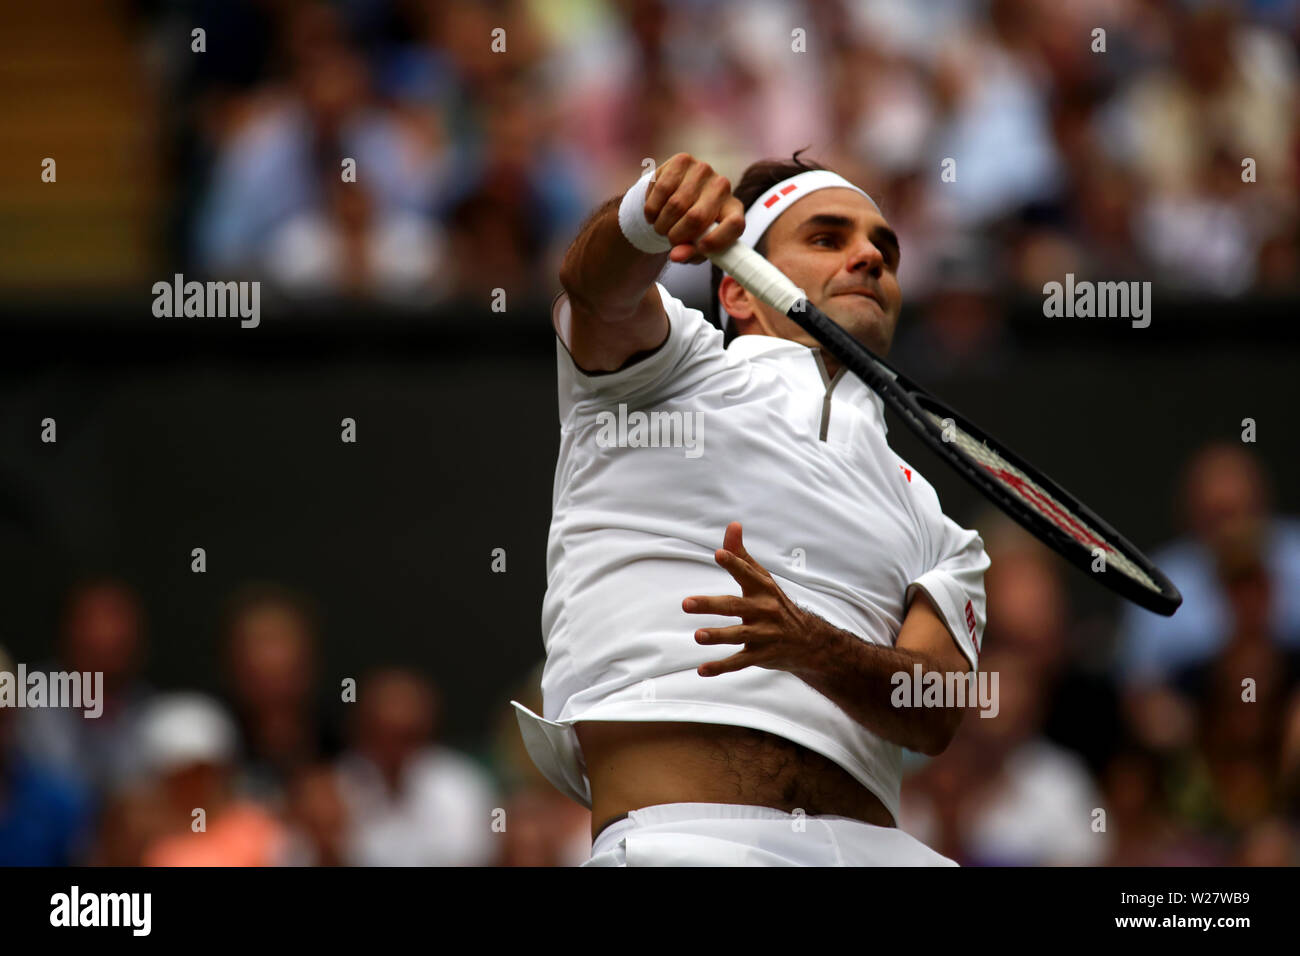 Wimbledon, 6 July 2019 -  Roger Federer during his third round match against Lucas Pouille of France today at Wimbledon.  Federer won in straight sets. Stock Photo